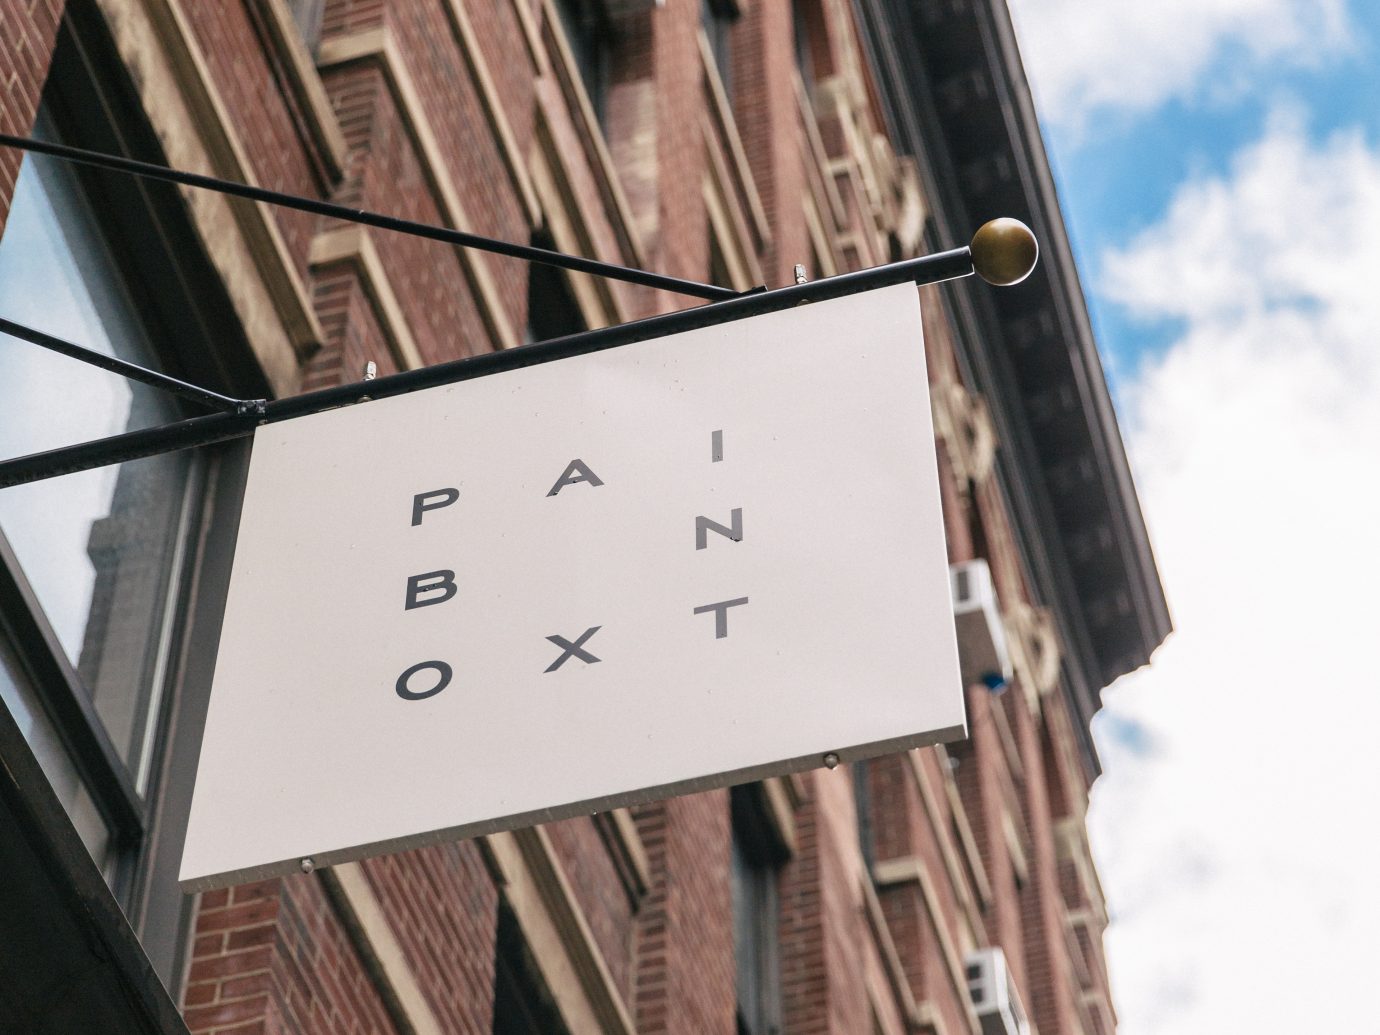 Paintbox exterior sign